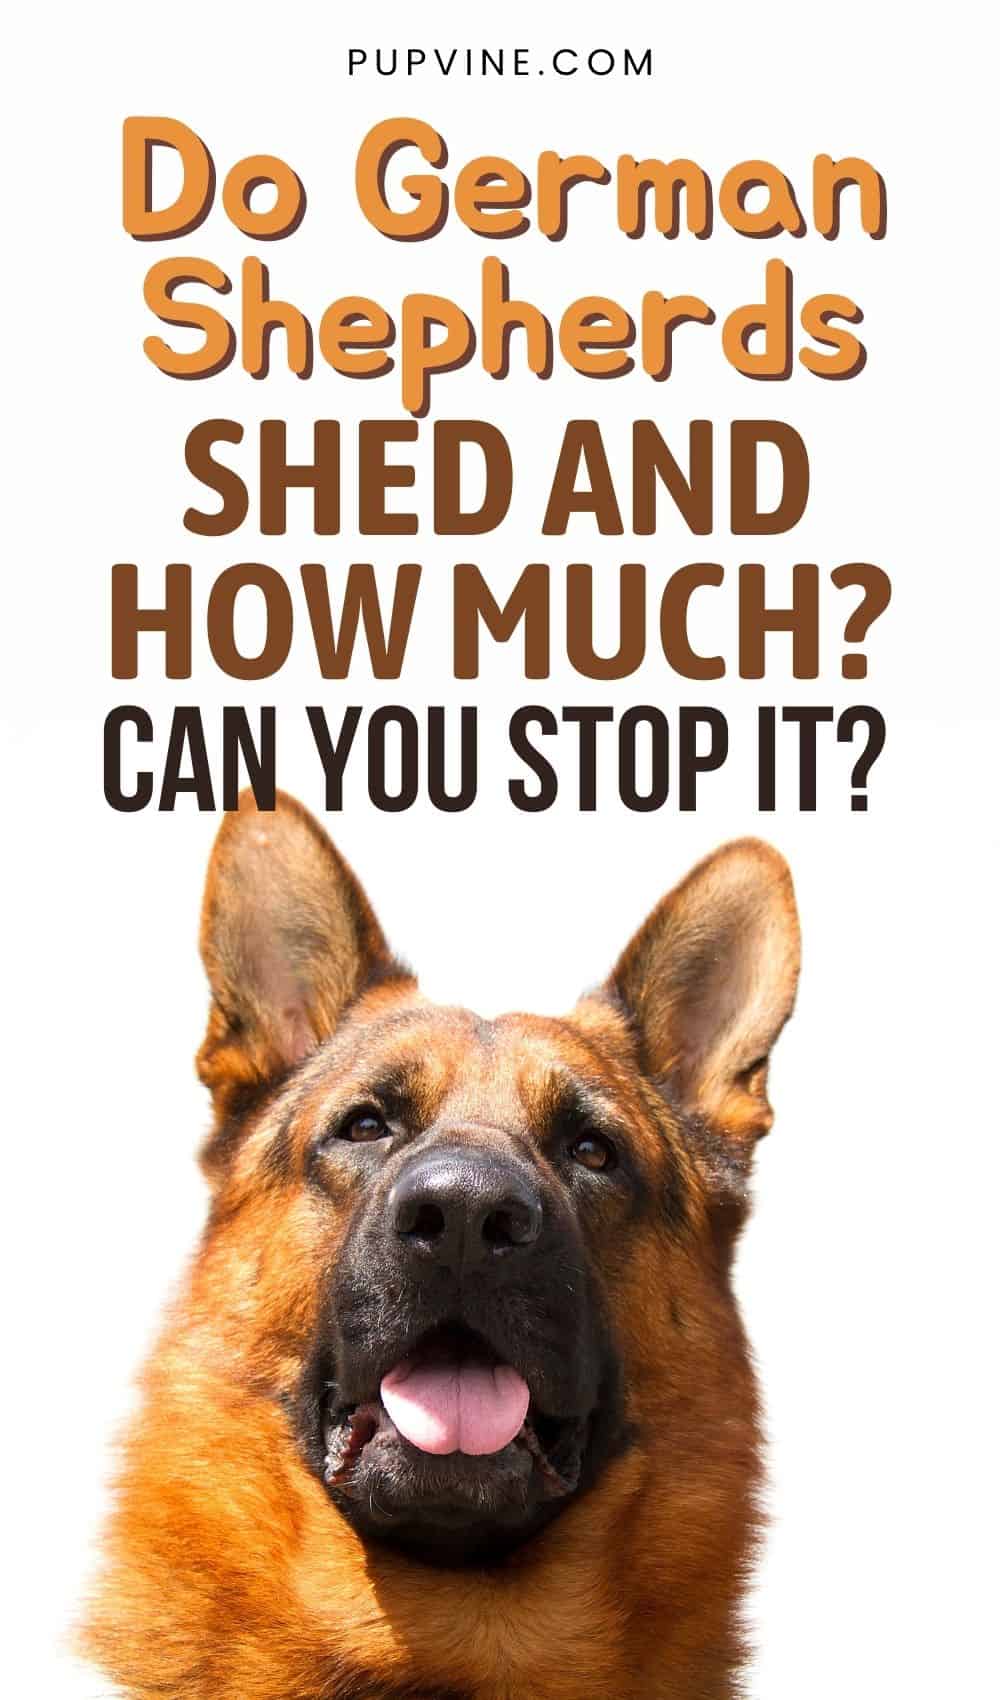 Do German Shepherds Shed And How Much Can You Stop It